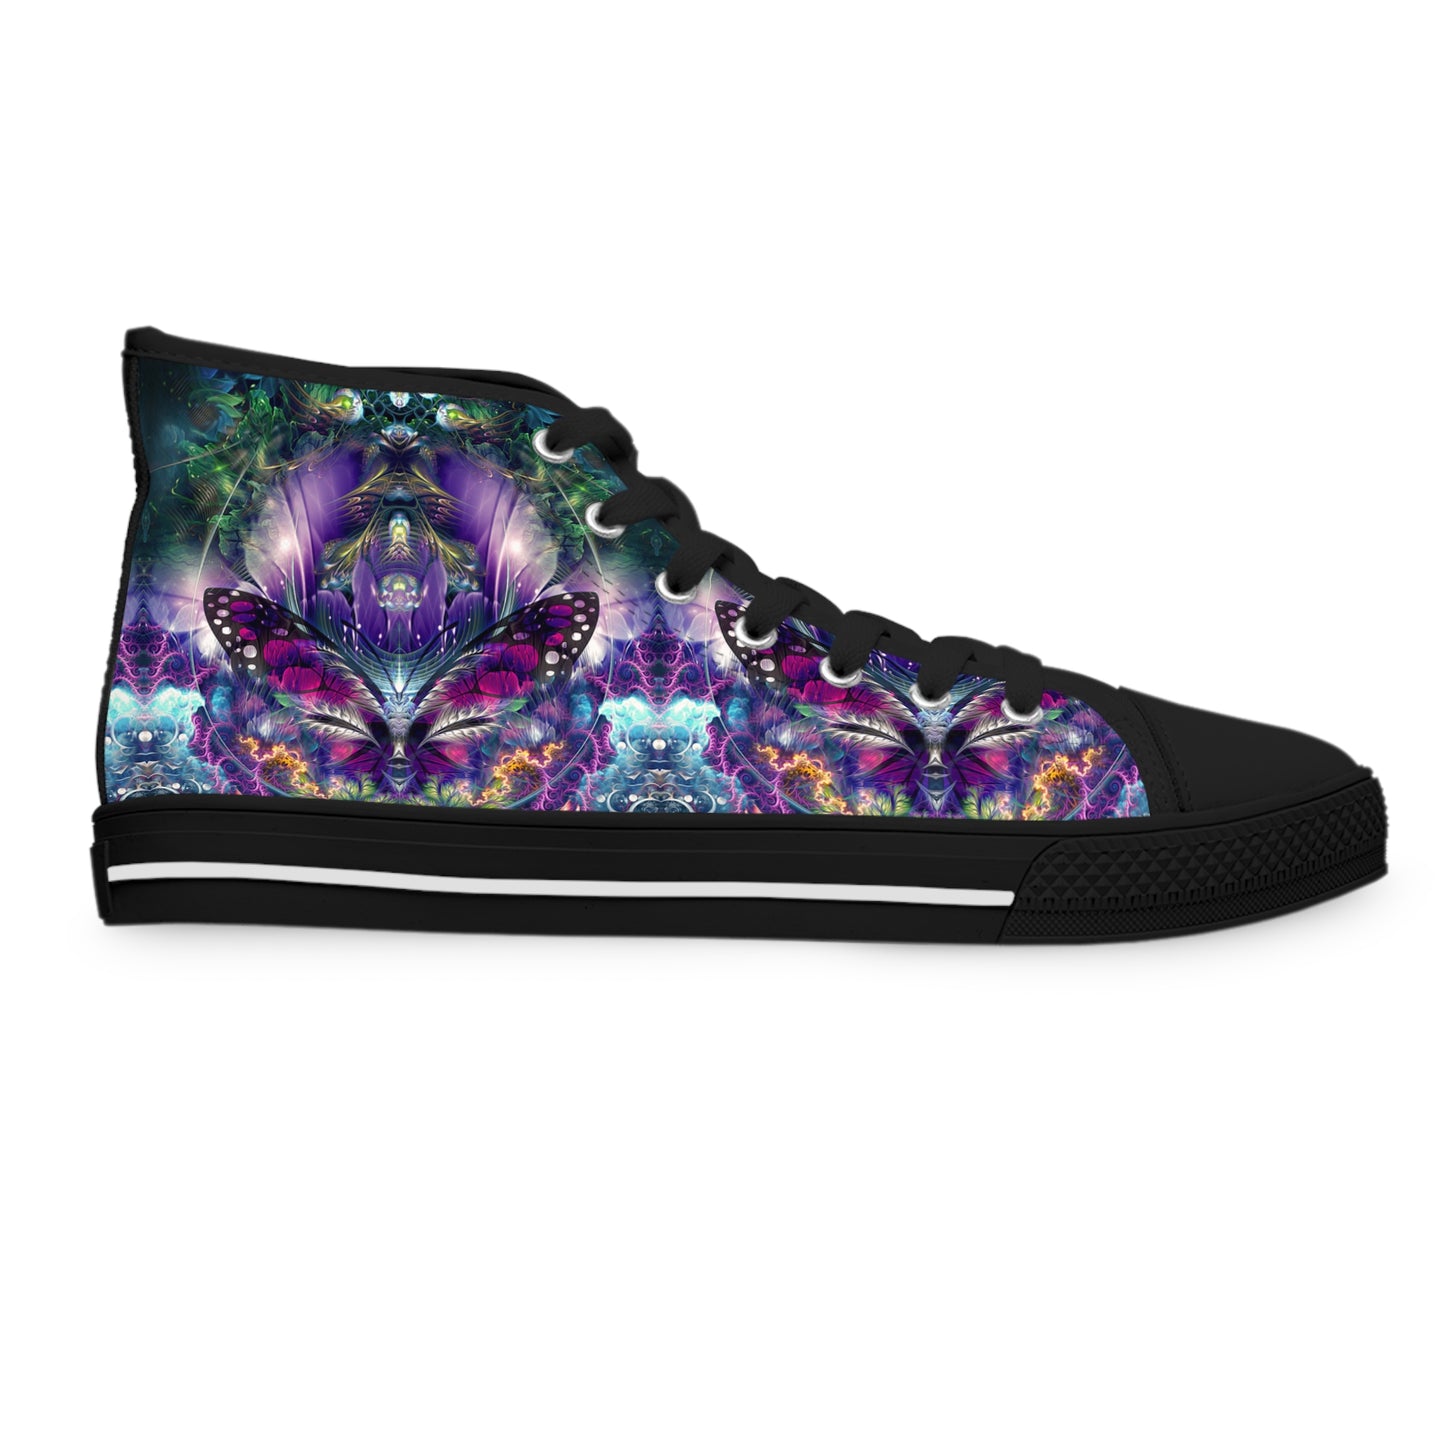 "Emergence V3" WOMEN'S HIGH TOP SNEAKERS